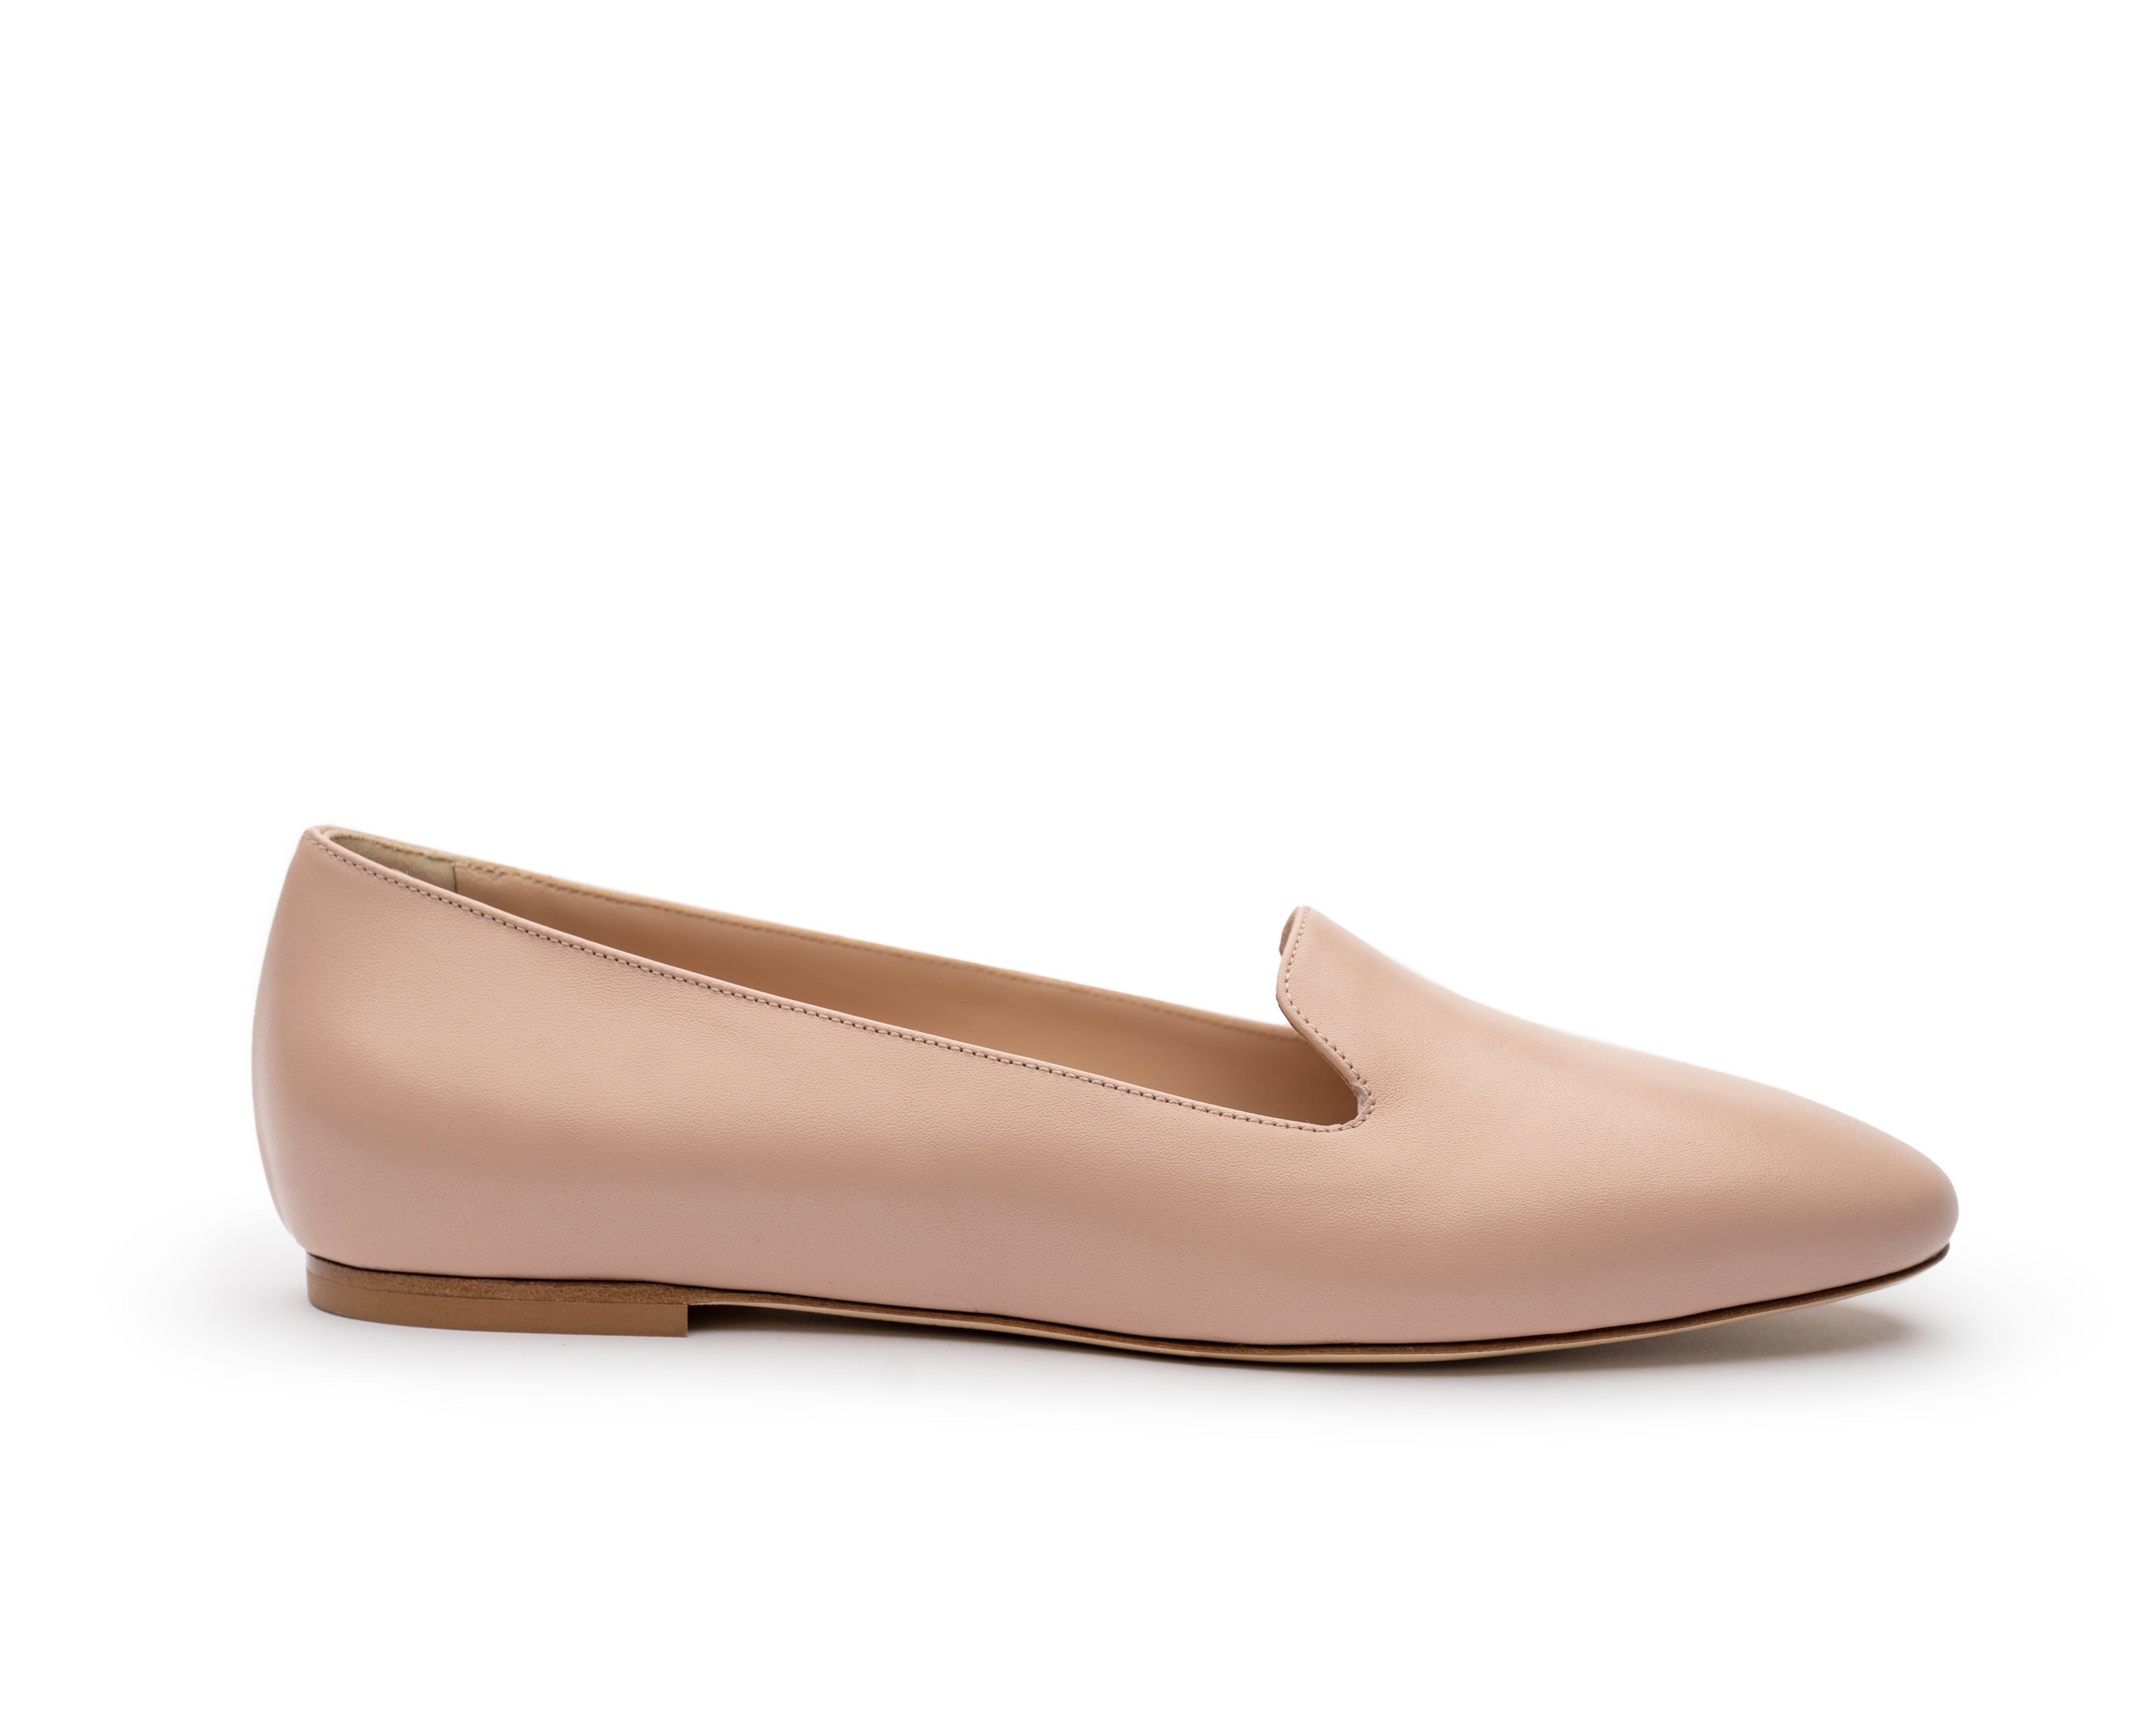 Comfortable. Professional Loafers. Italian Loafers. Nude Skin Tone Loafers.